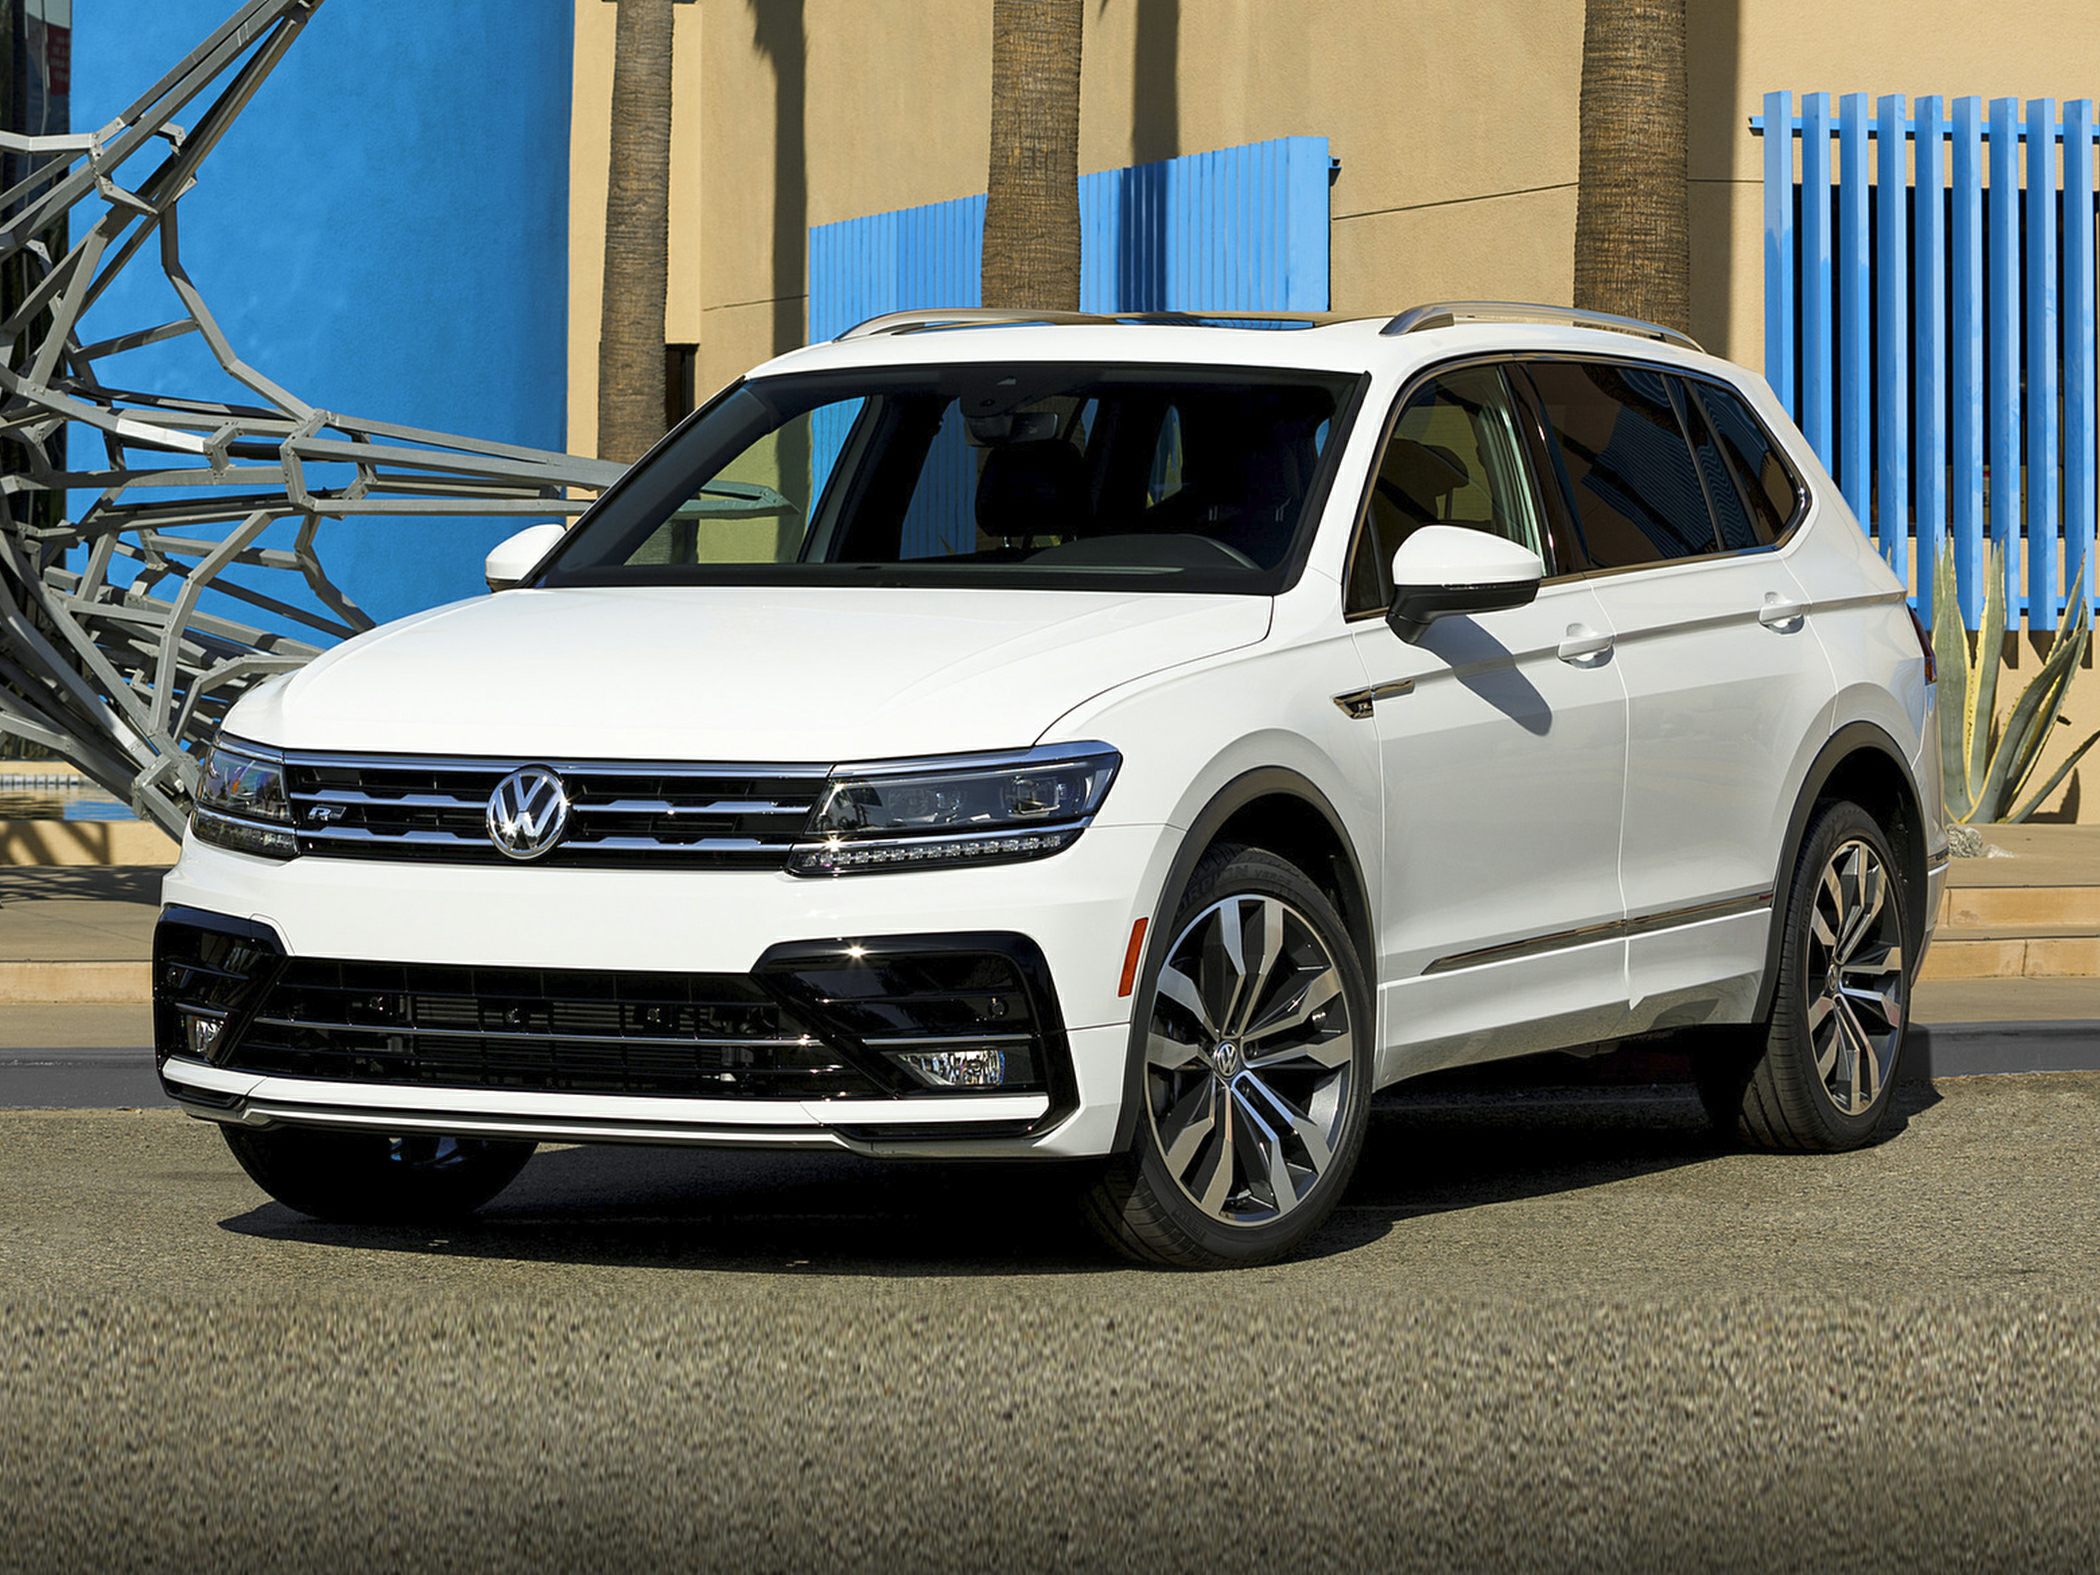 Great Deals on a new 2021 Volkswagen Tiguan 2 0T SE R Line Black 4dr Front wheel Drive at The 